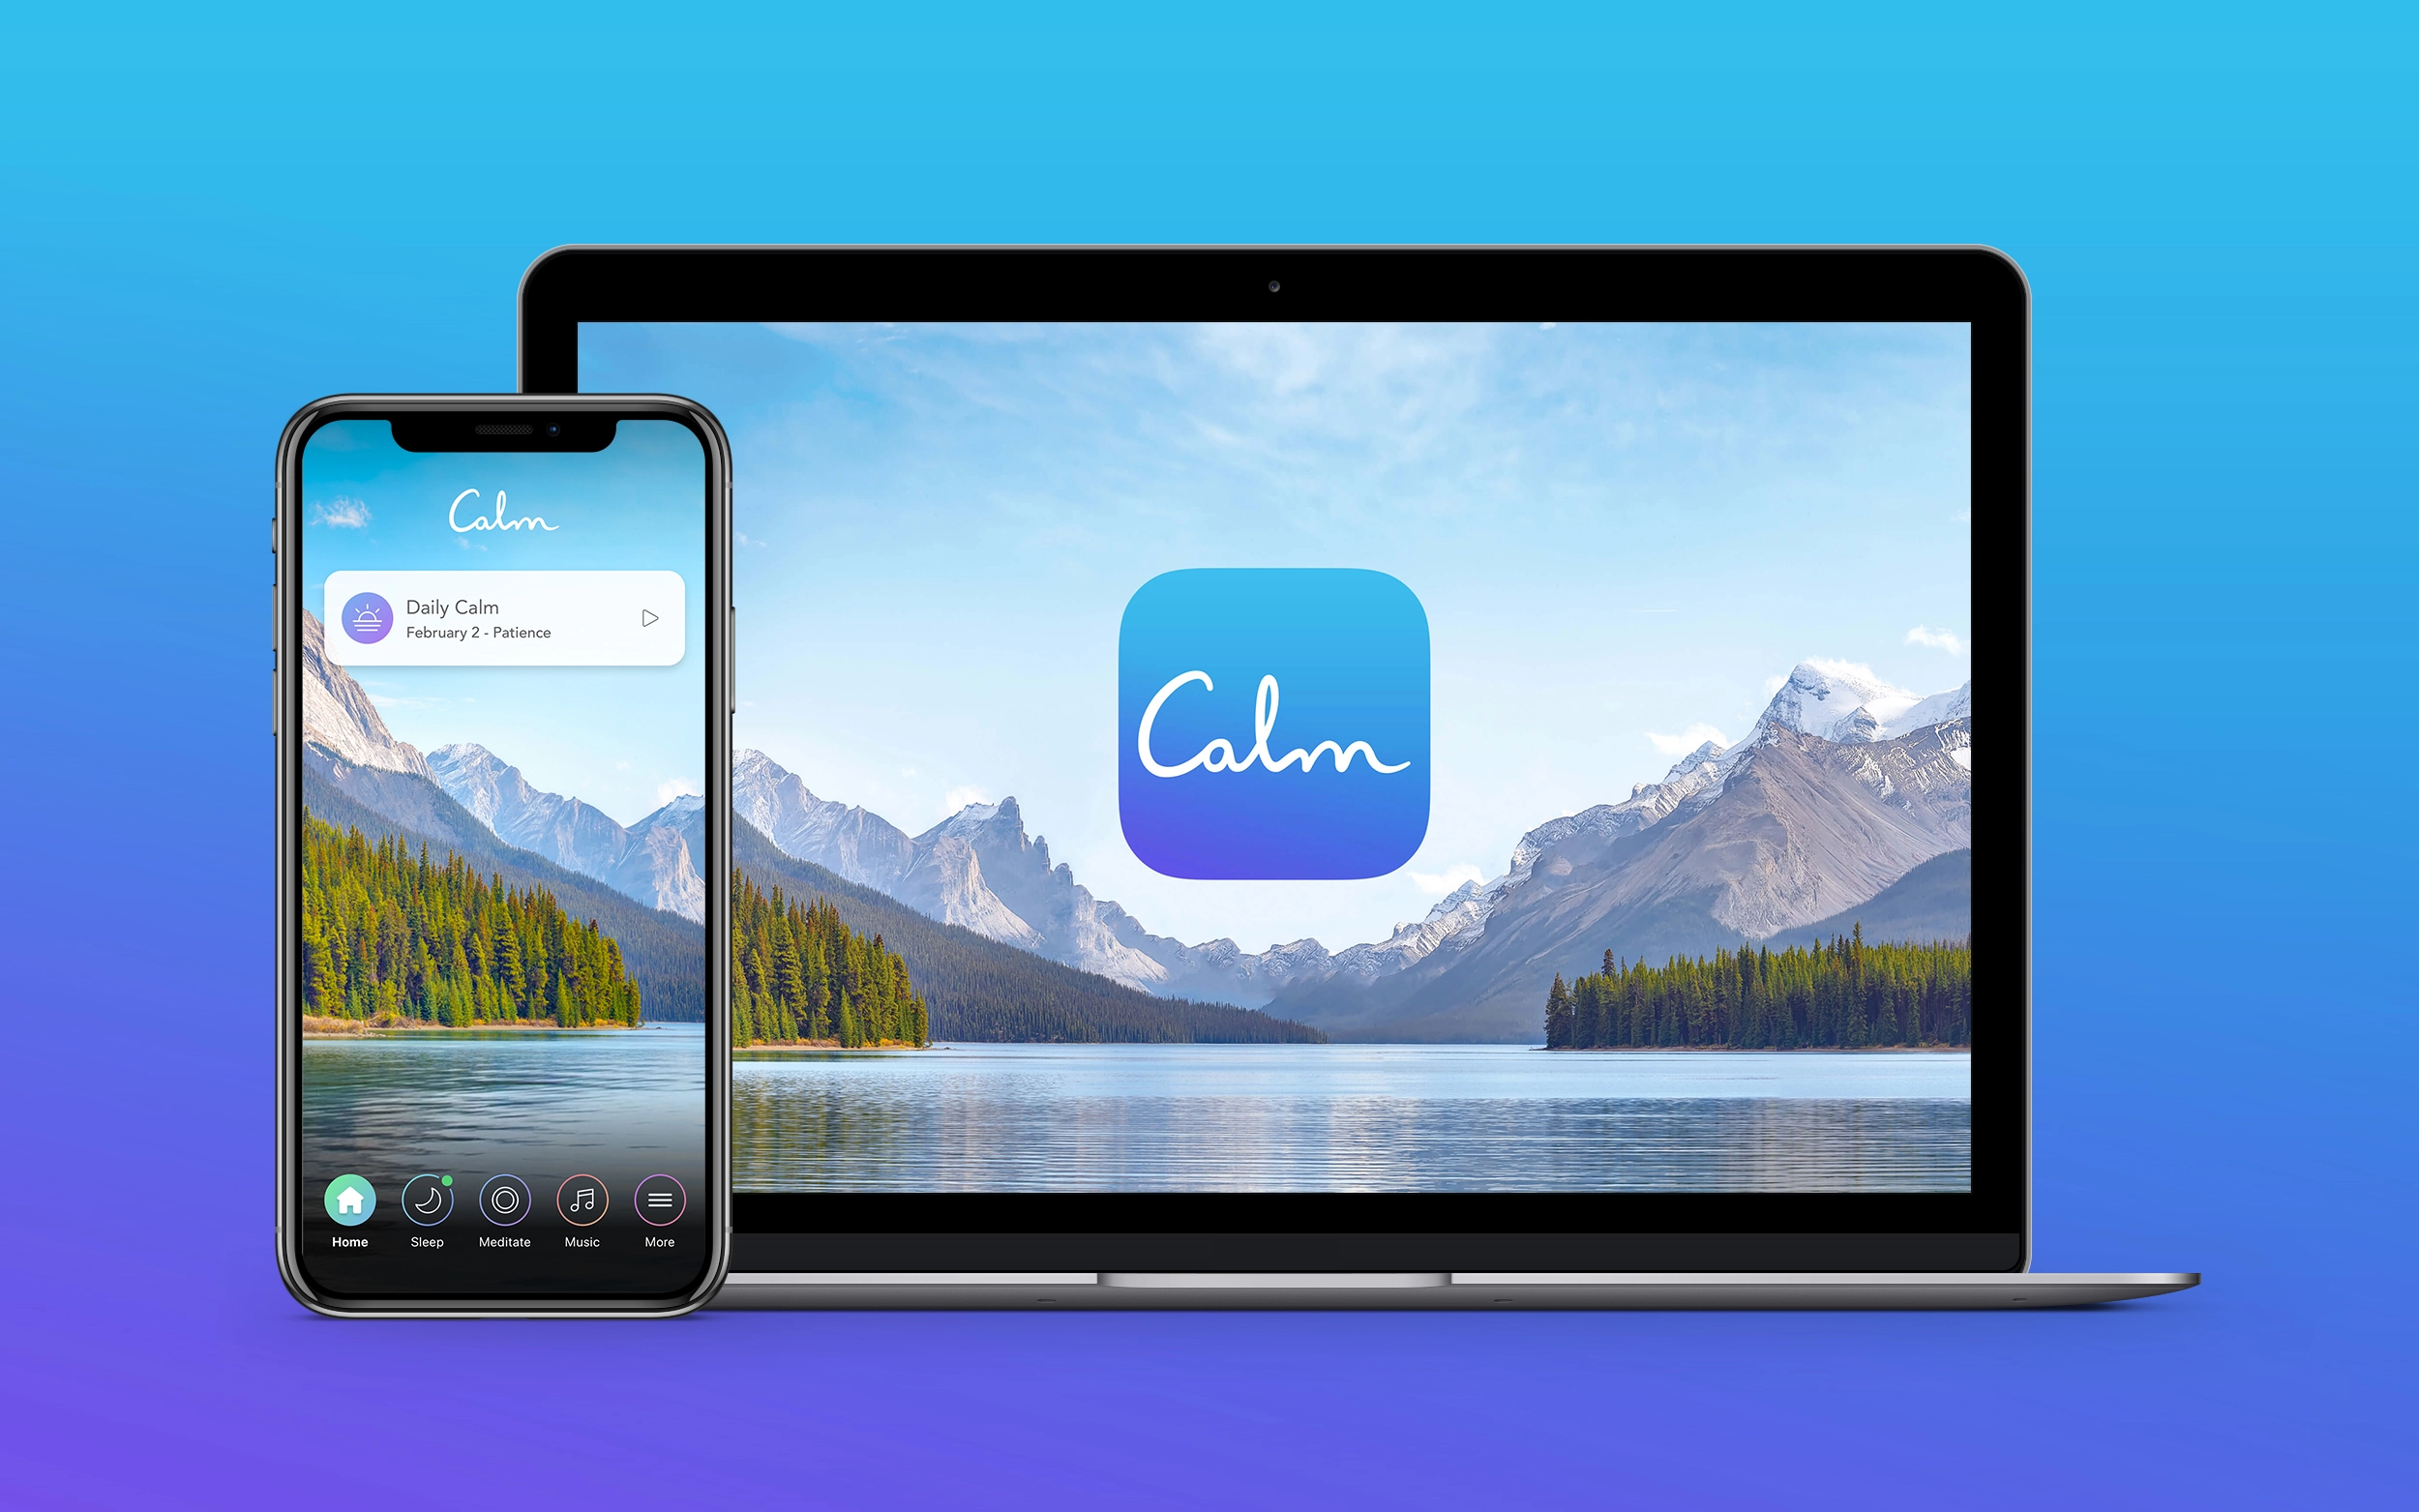 [$ 0.8] Calm Premium - 3 Months Trial Subscription Key (ONLY FOR NEW ACCOUNTS)